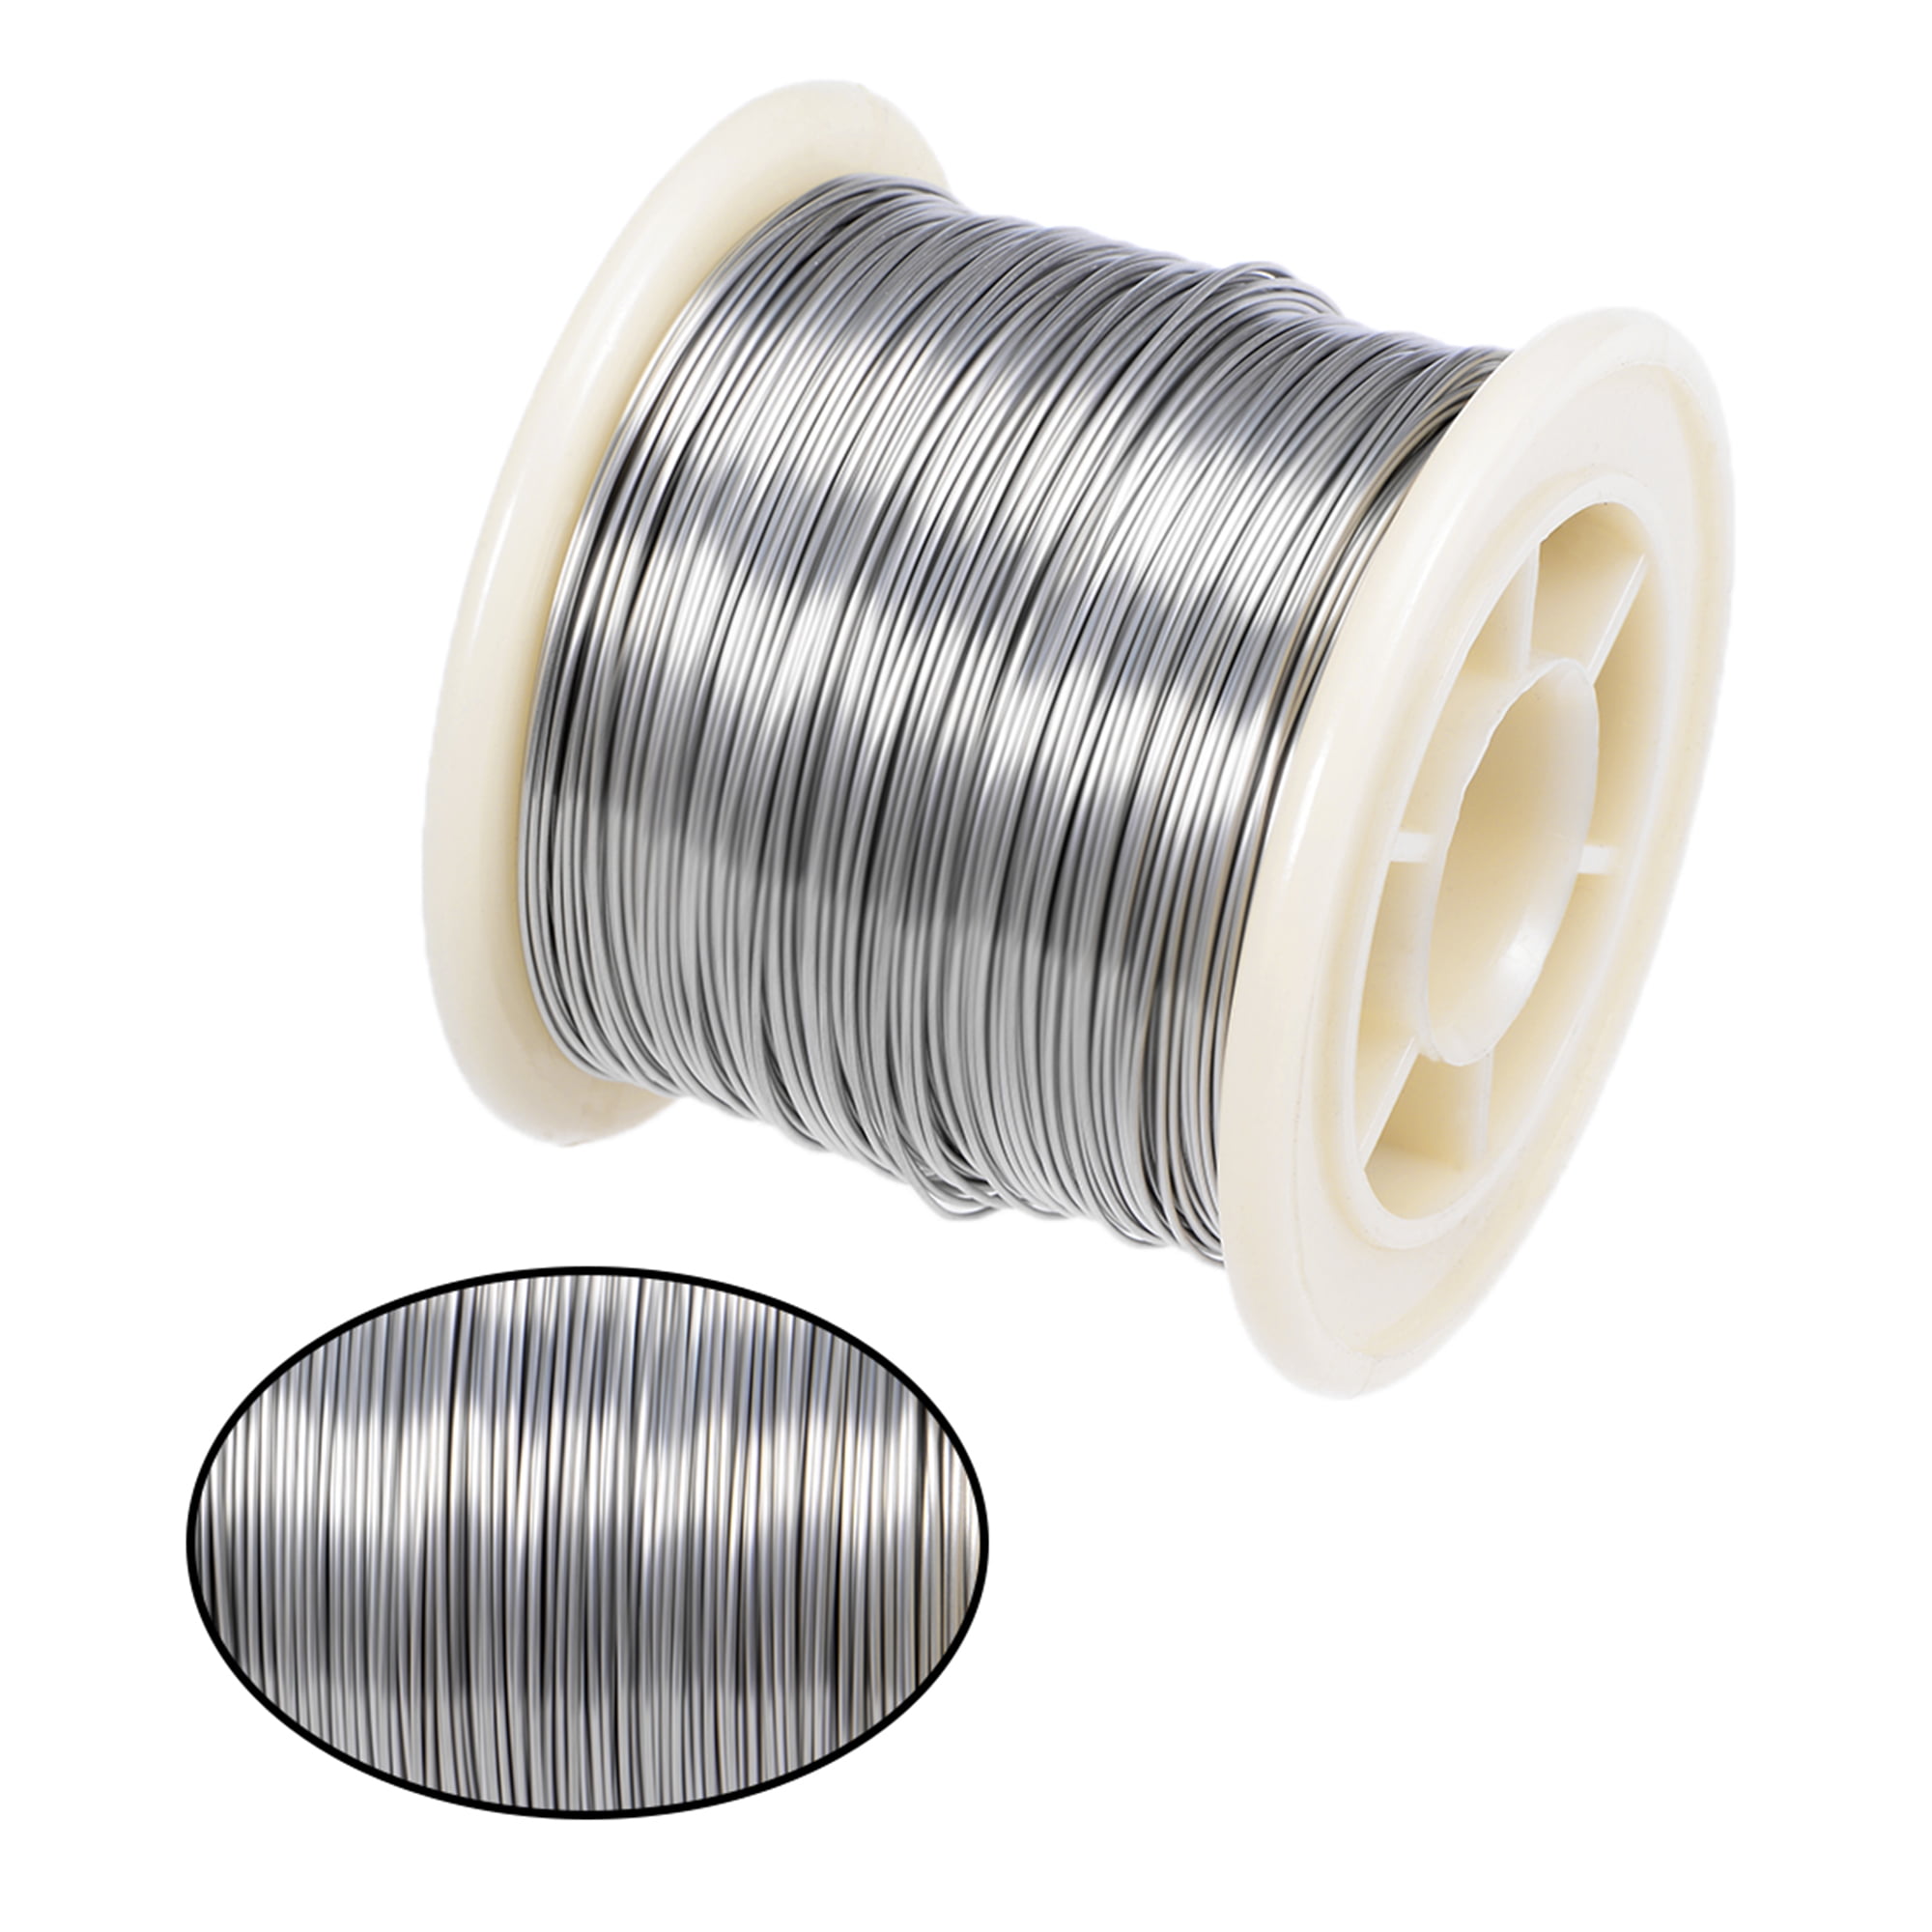 uxcell 32 Gauge Heat Resistance Wire Wrapping 16ft Heating Resistor Wires Electronic Coil